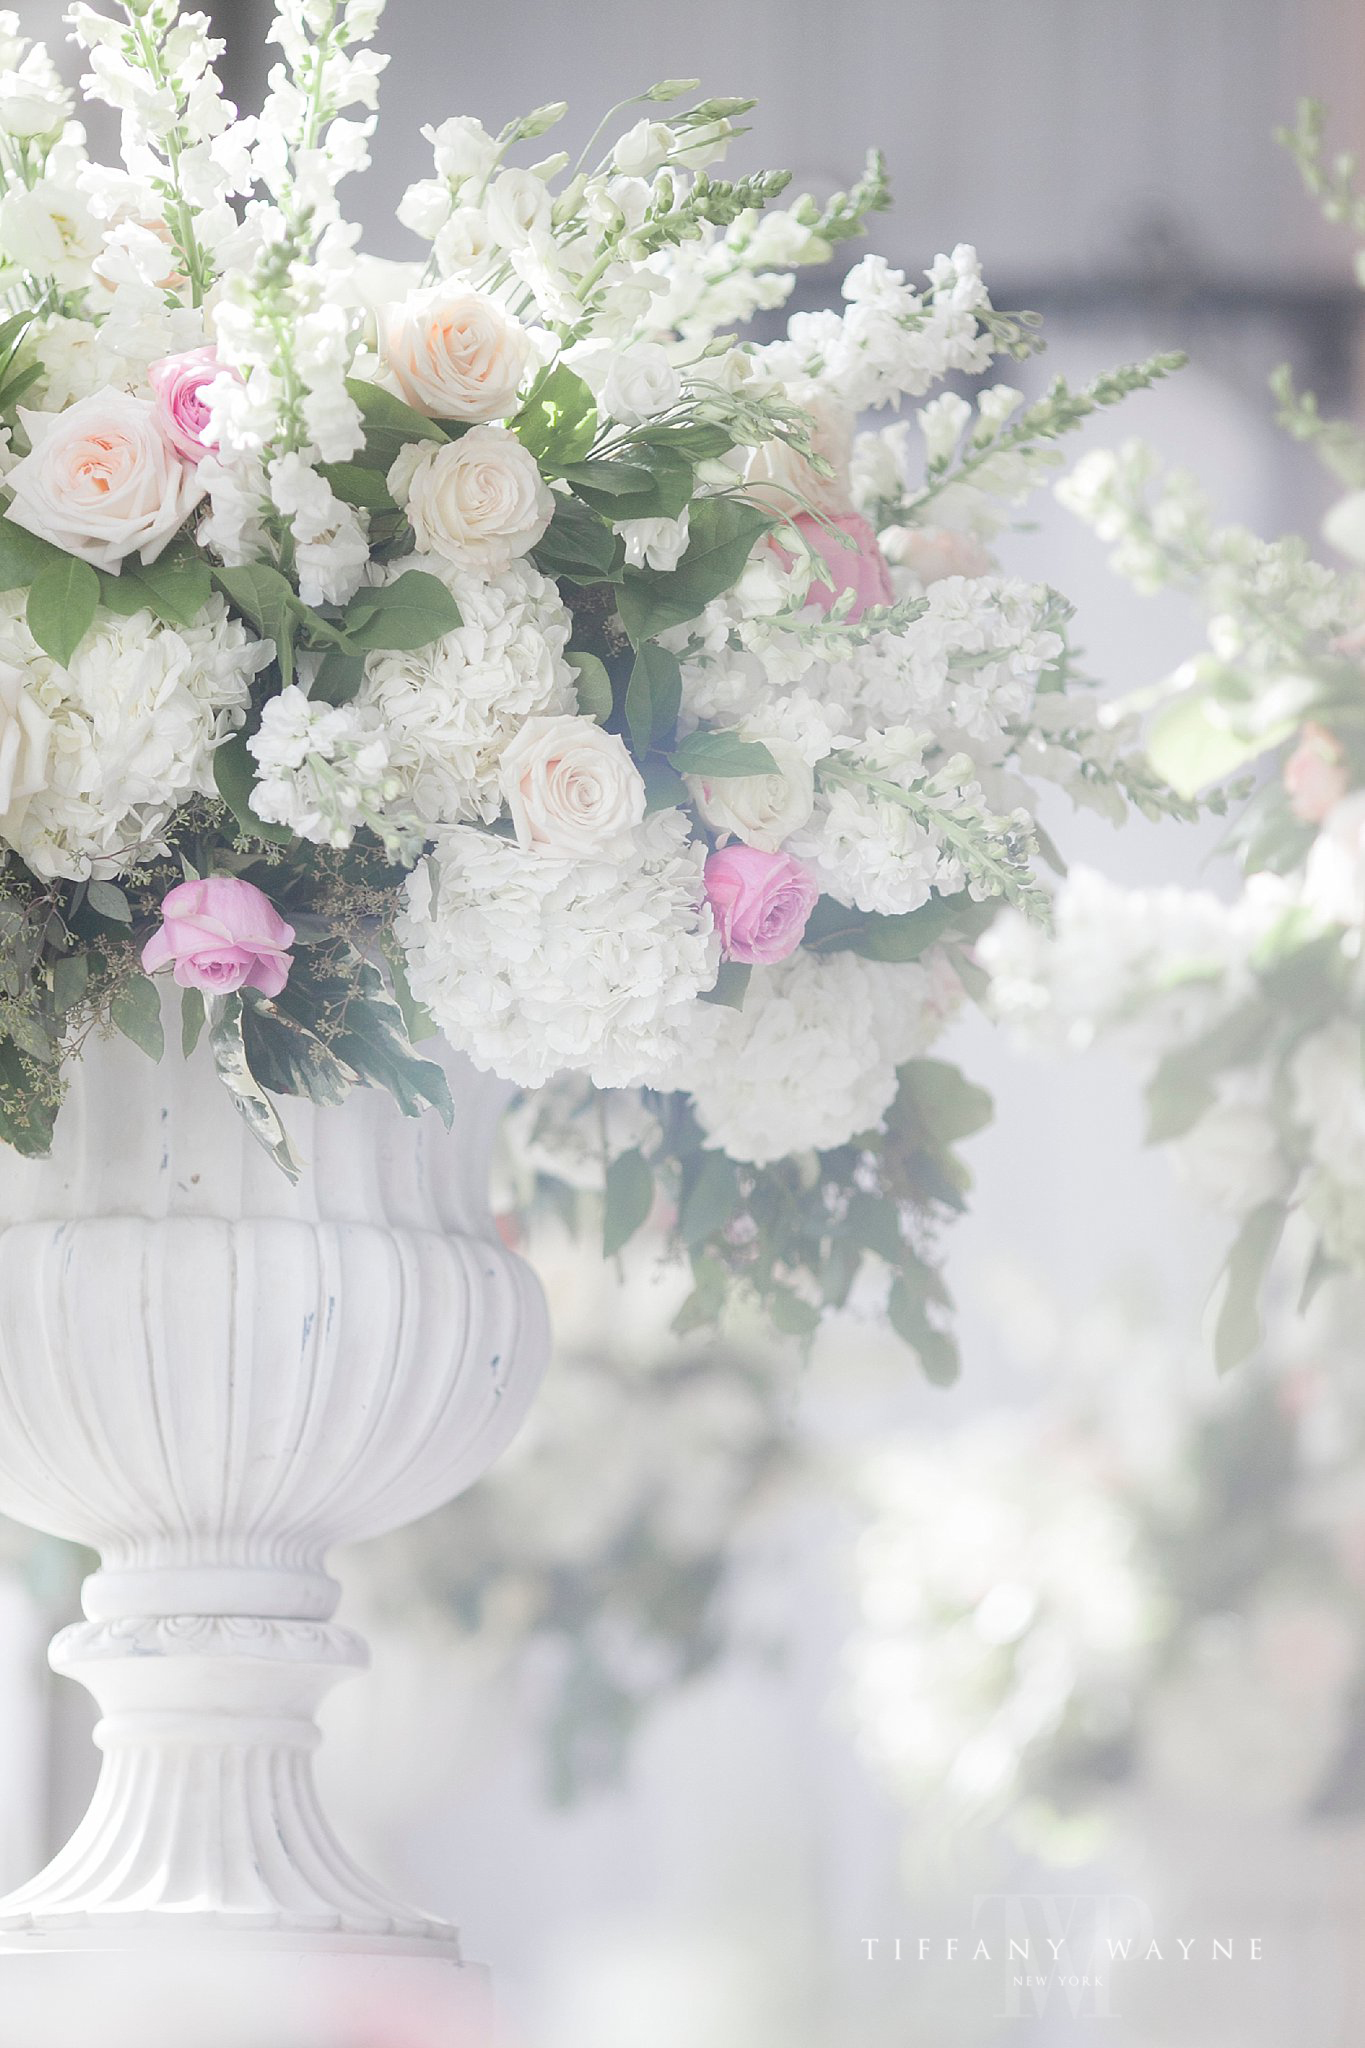 pastel floral arrangement for Renaissance Hotel wedding day photographed by Tiffany Wayne Photography